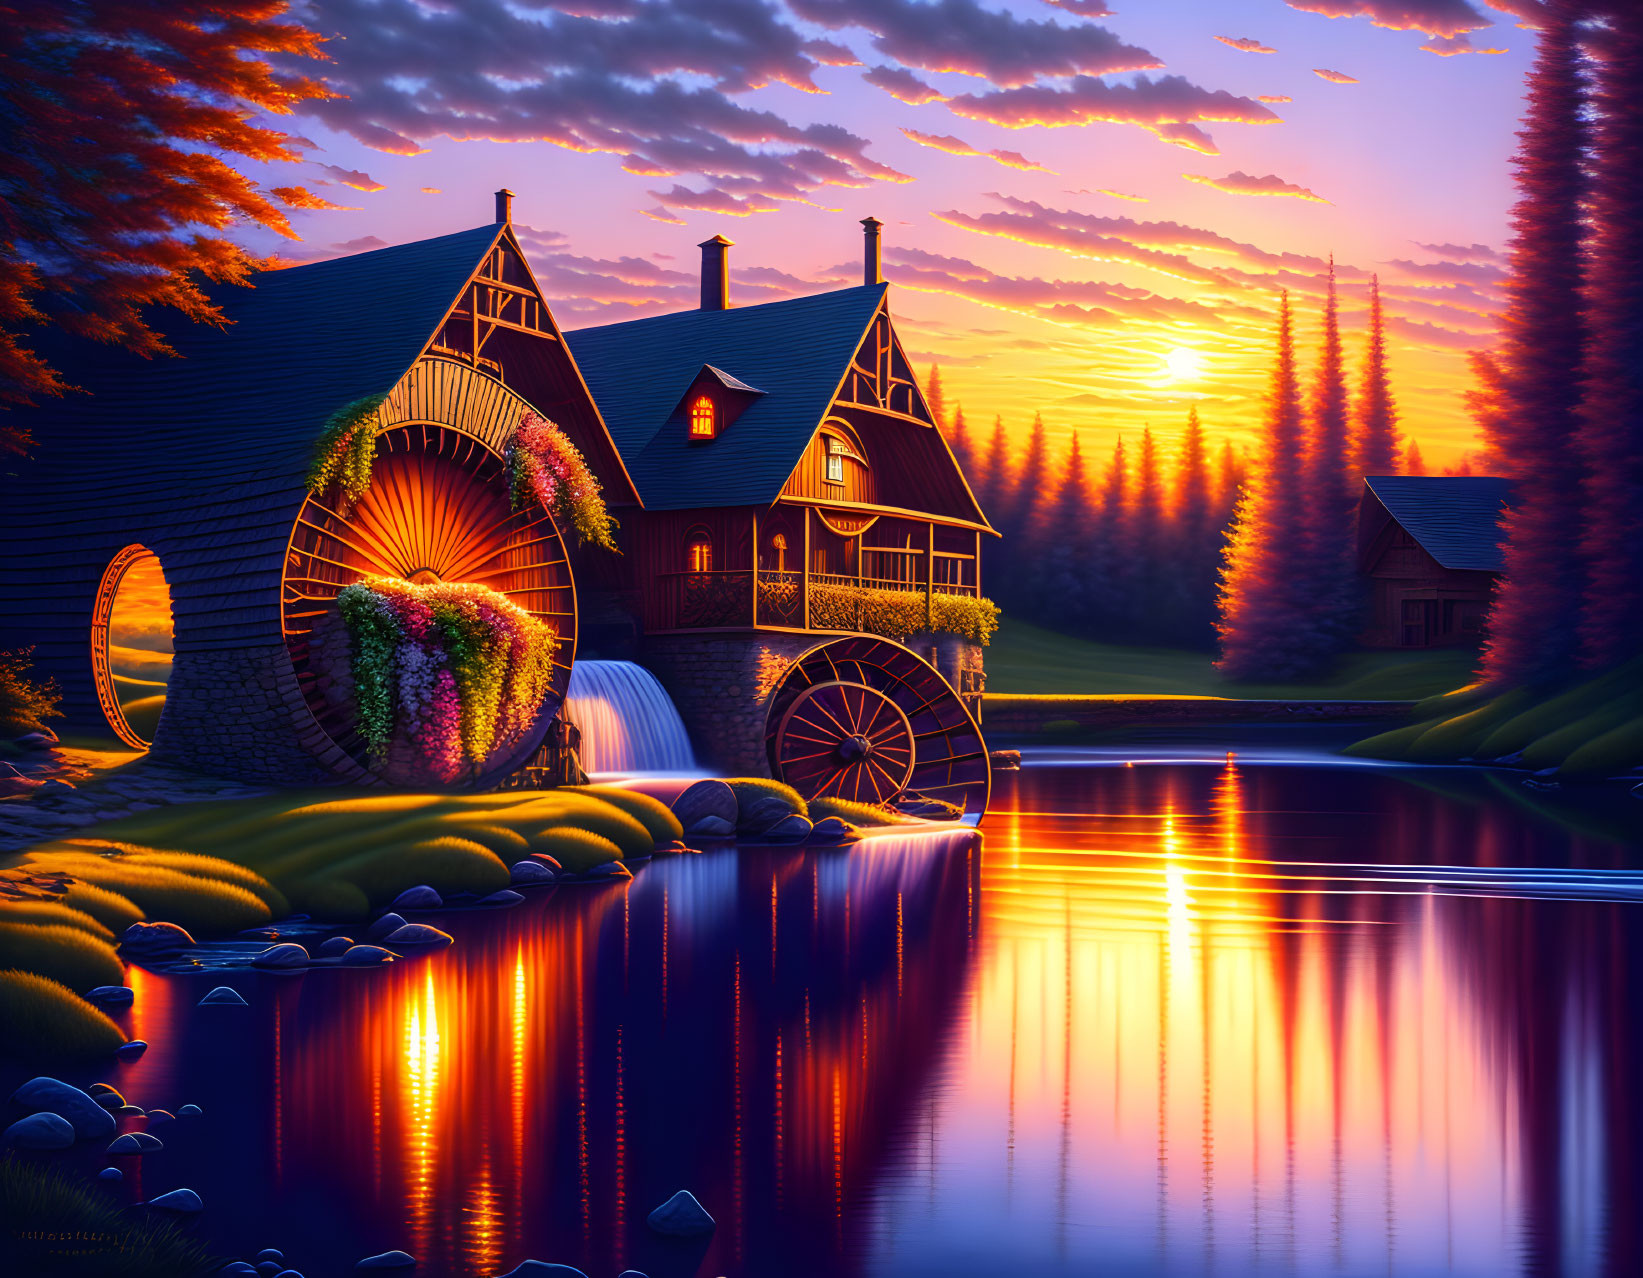 Scenic sunset view of a charming house by river with waterwheel